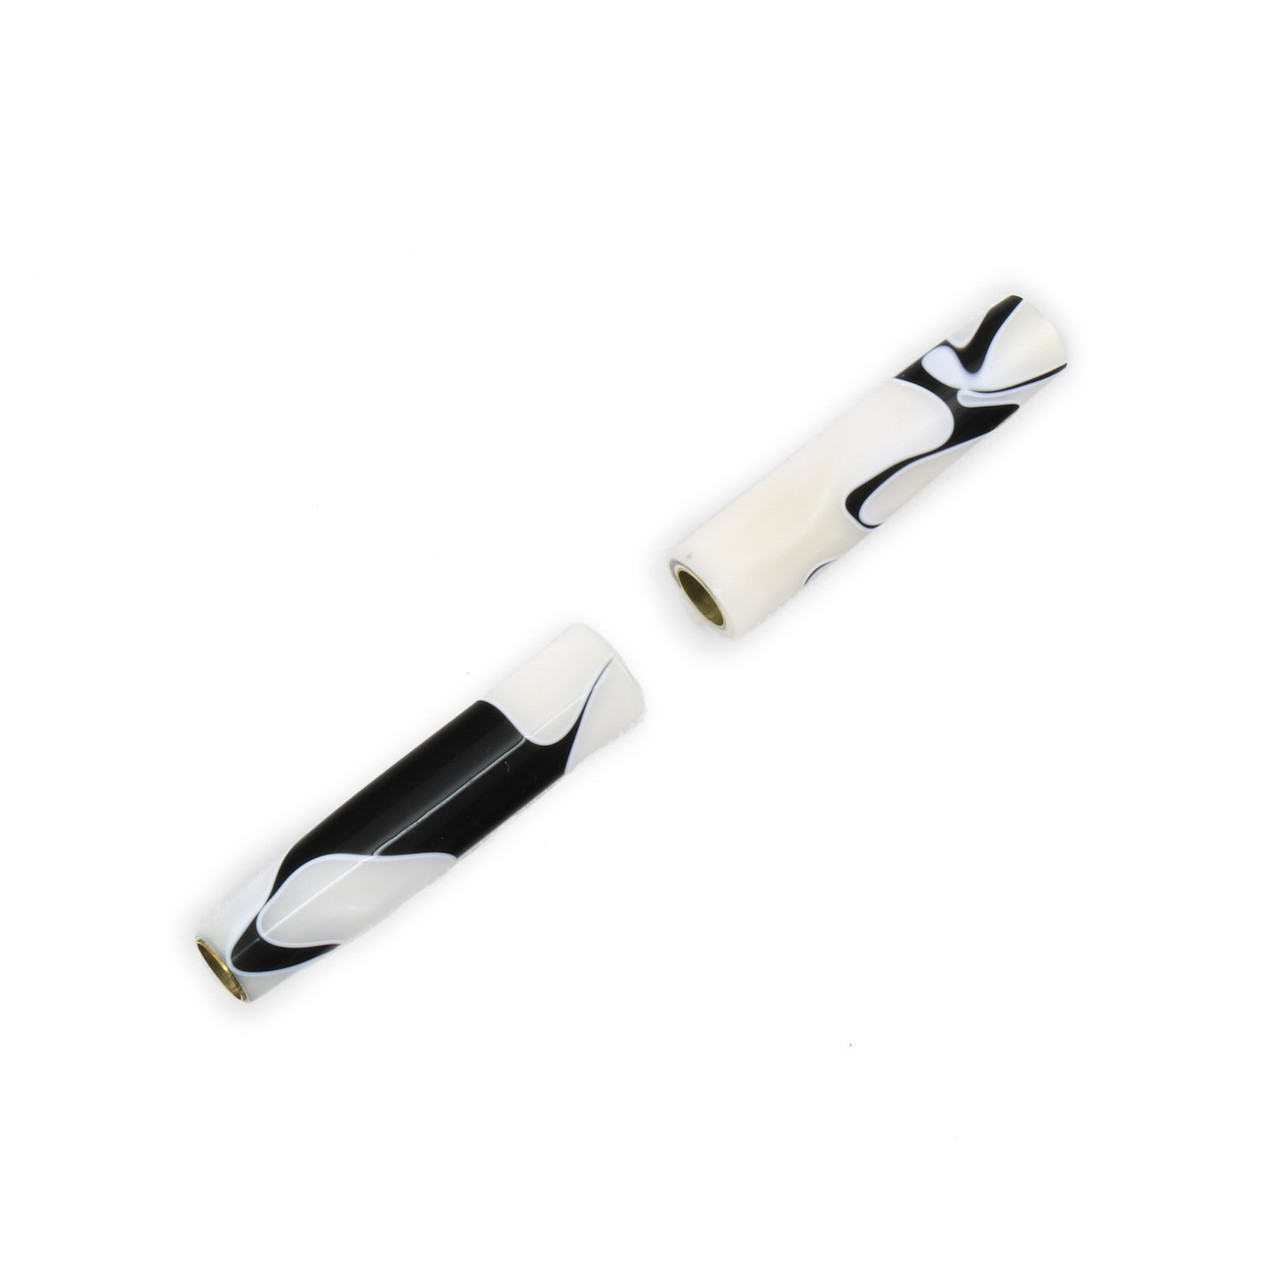 Legacy, Finished Pen Blank for Elegant American Pen Kits, White and Black